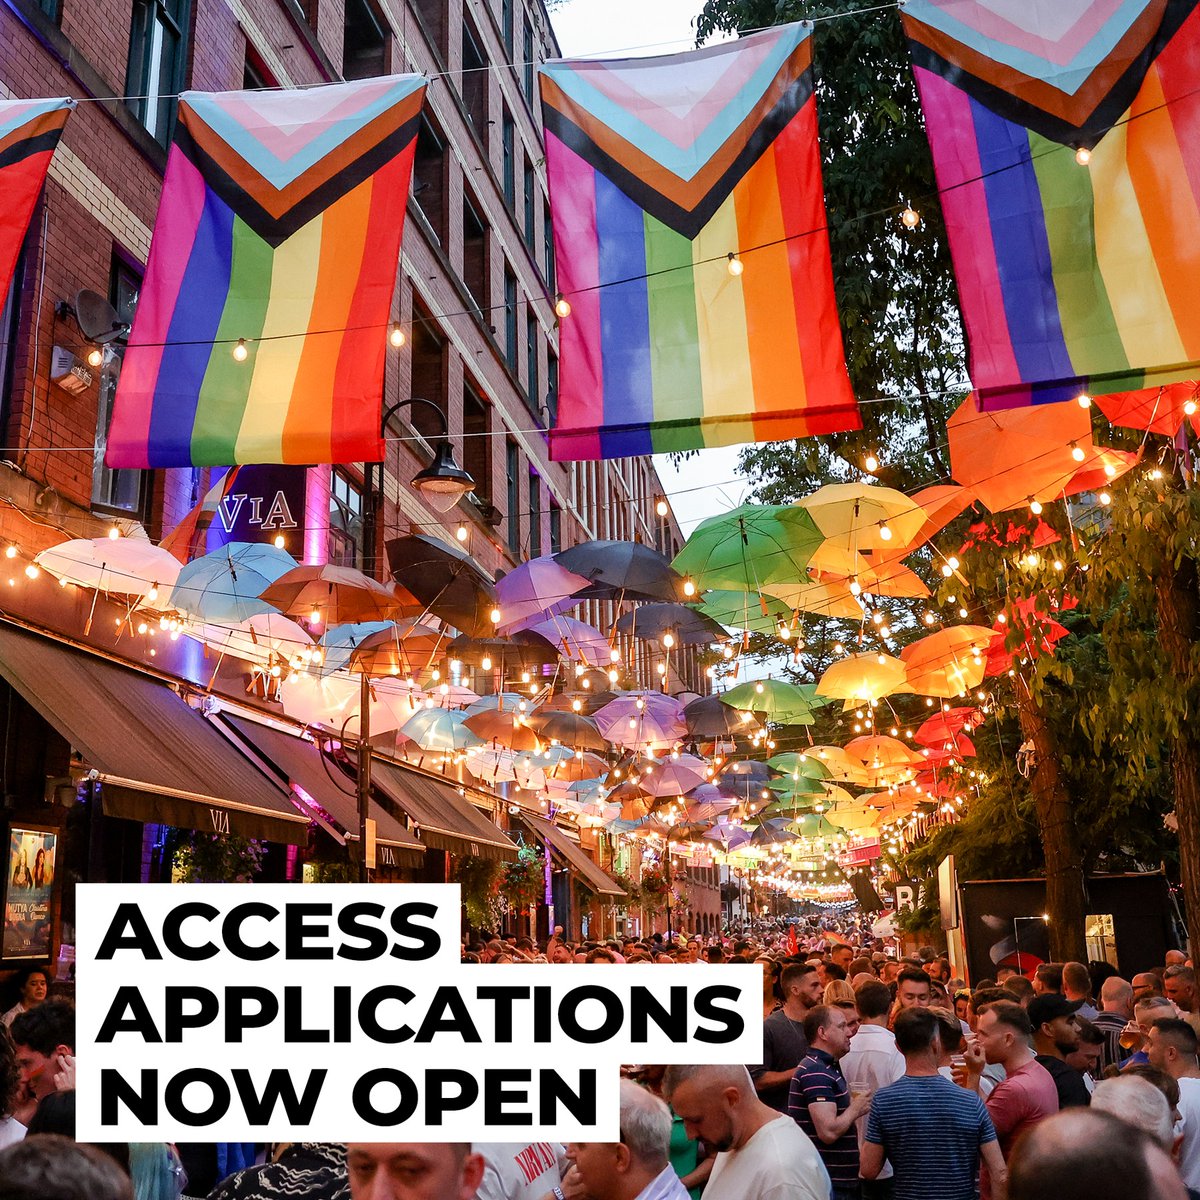 Access applications now open 🎊 We’re dedicated to making sure Manchester Pride Festival is as accessible as possible for all that wish to attend the celebrations. Find out all you need to know and how to apply at manchesterpride.com/accessibility ✨